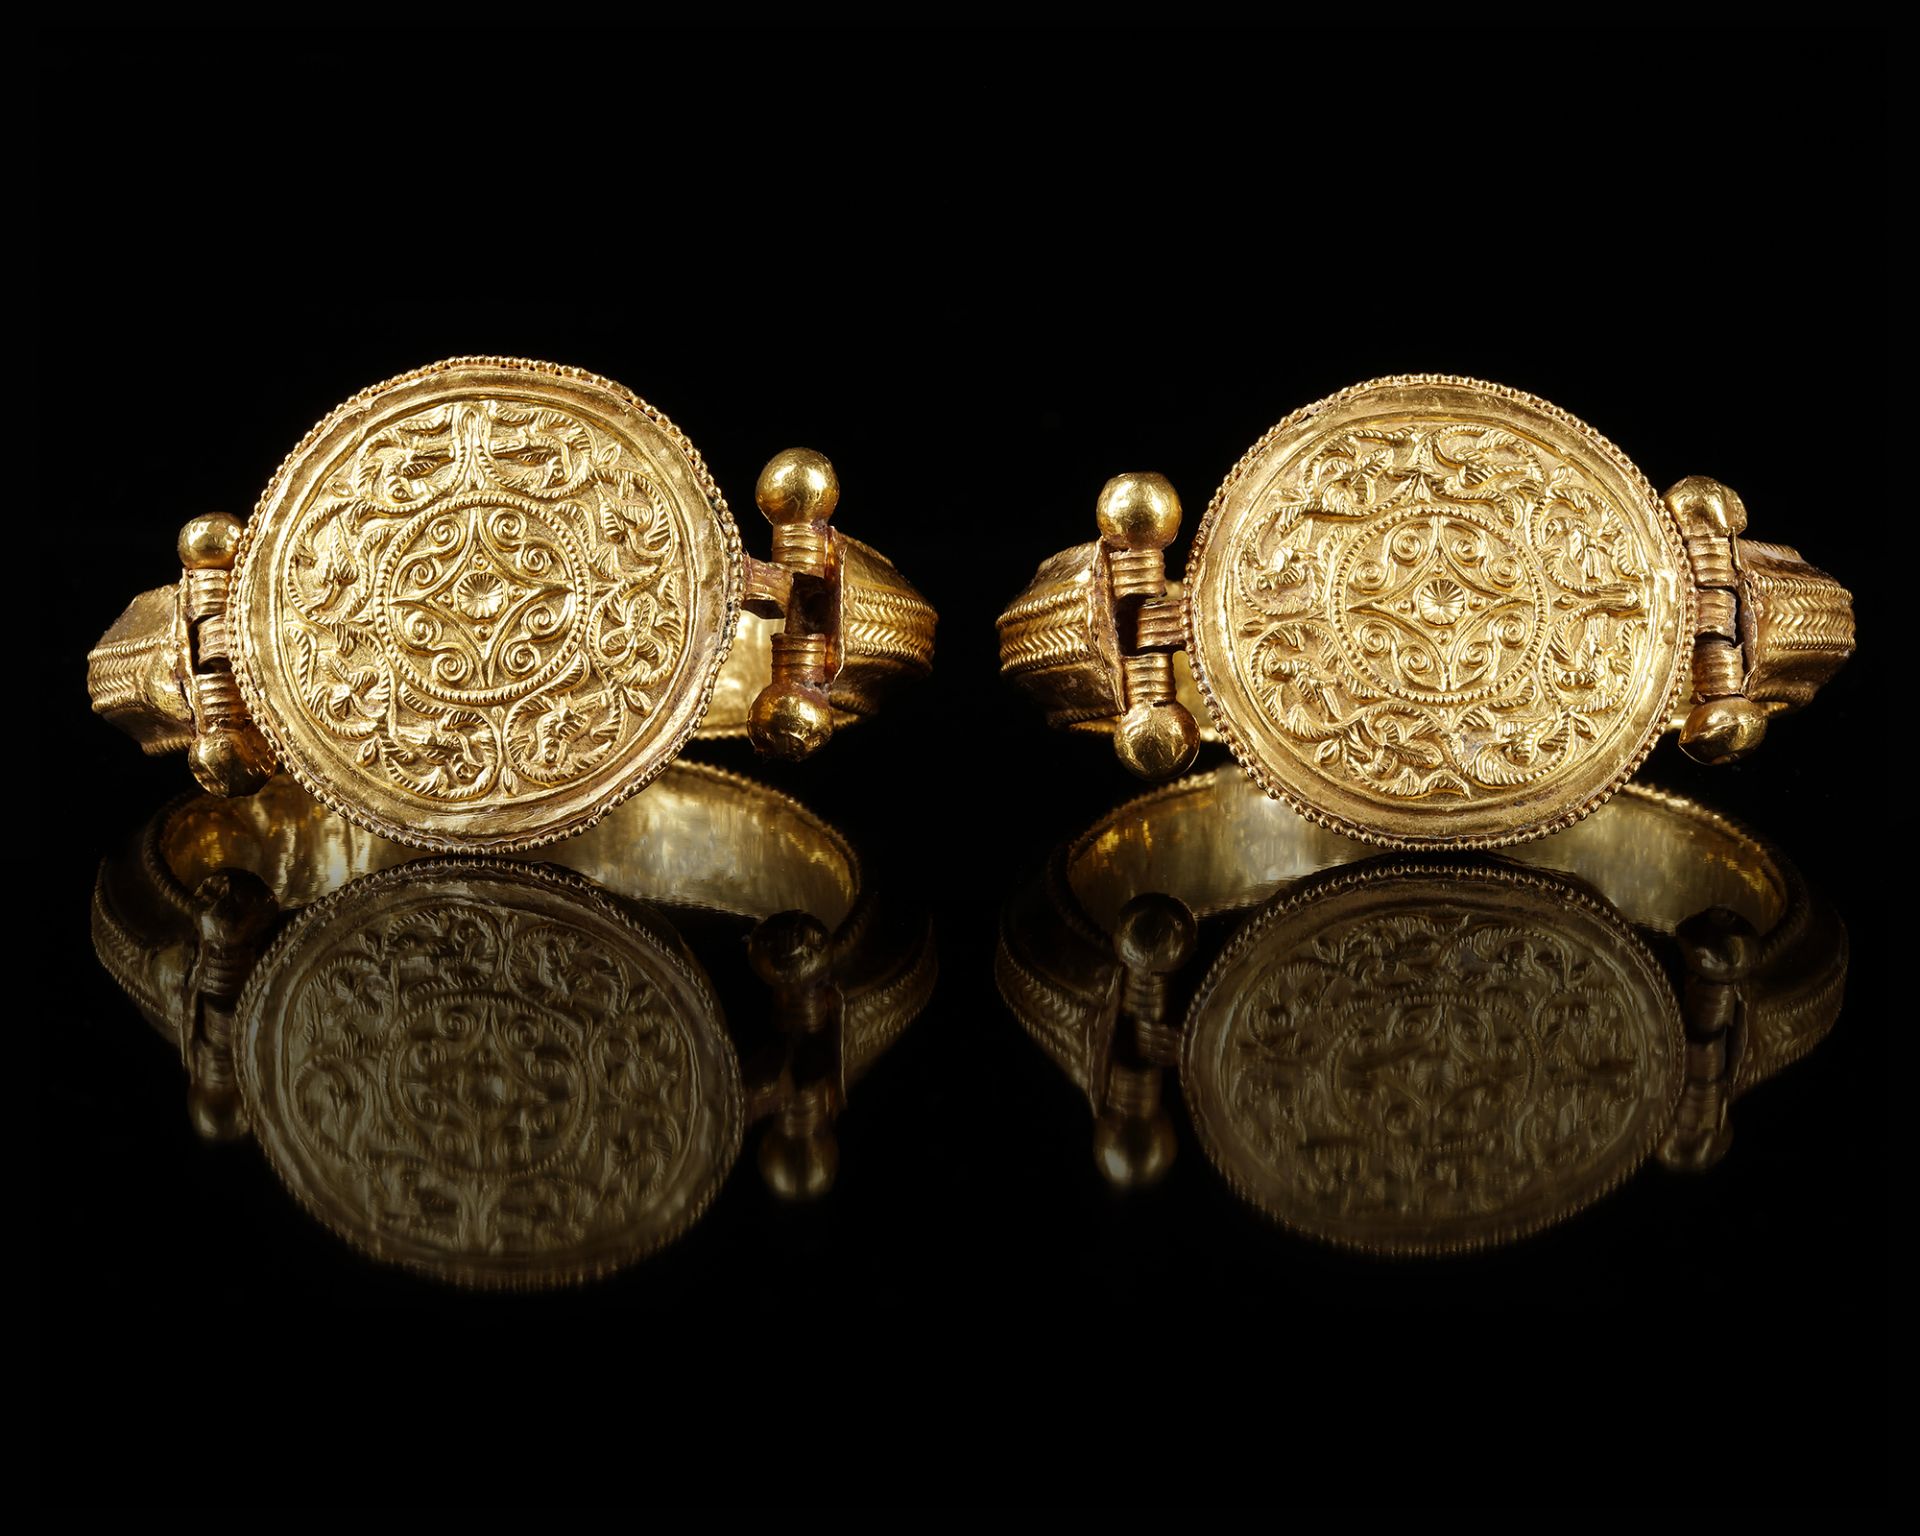 A RARE PAIR OF A FATIMID GOLD BRACELETS, POSSIBLY SYRIA, 11TH CENTURY - Image 3 of 14